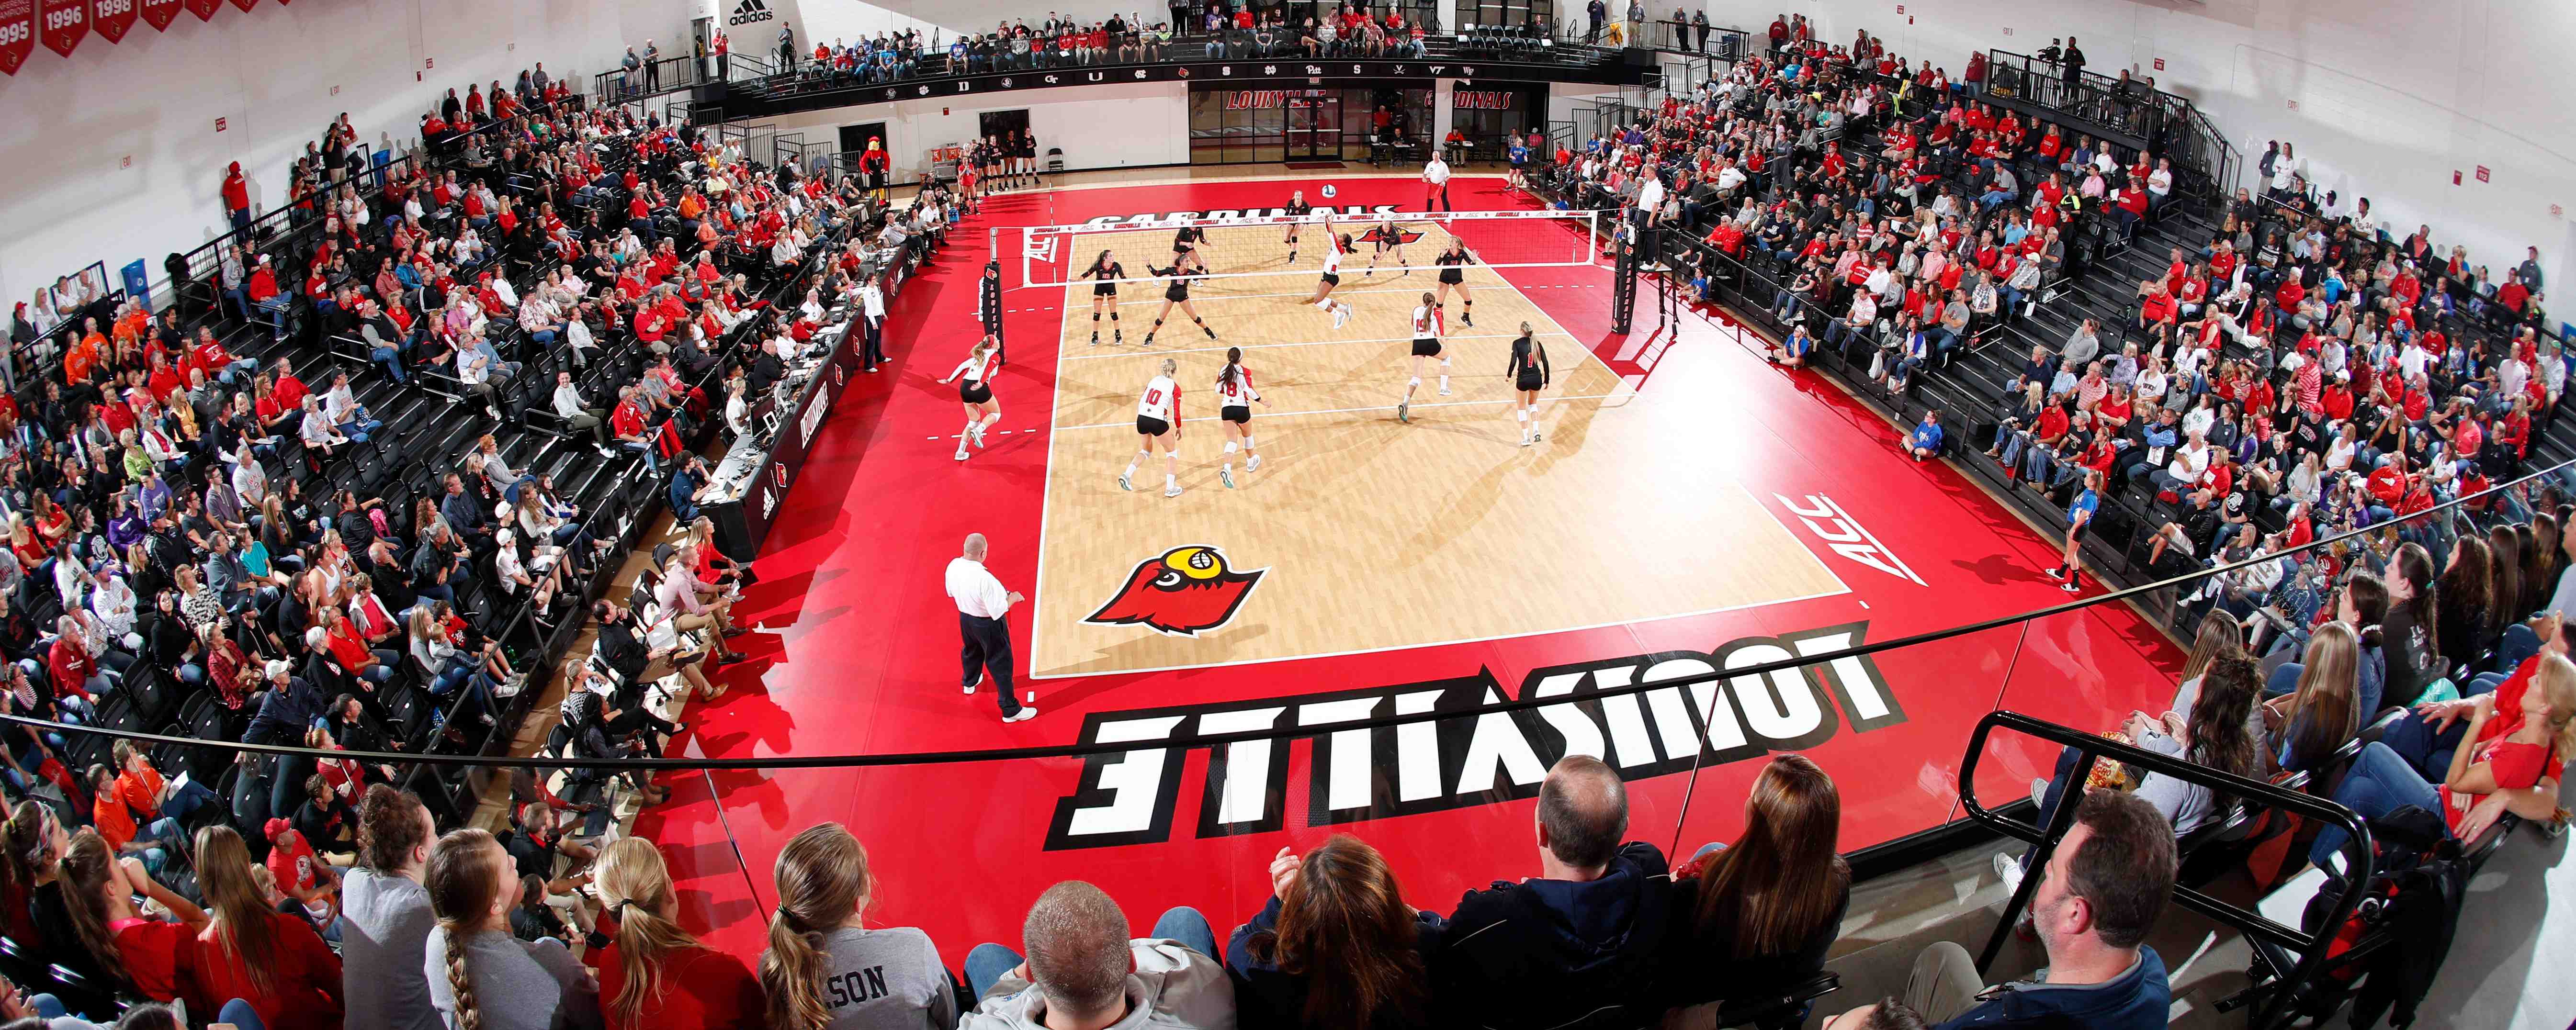 Can they do it again?' How Louisville volleyball is handling its